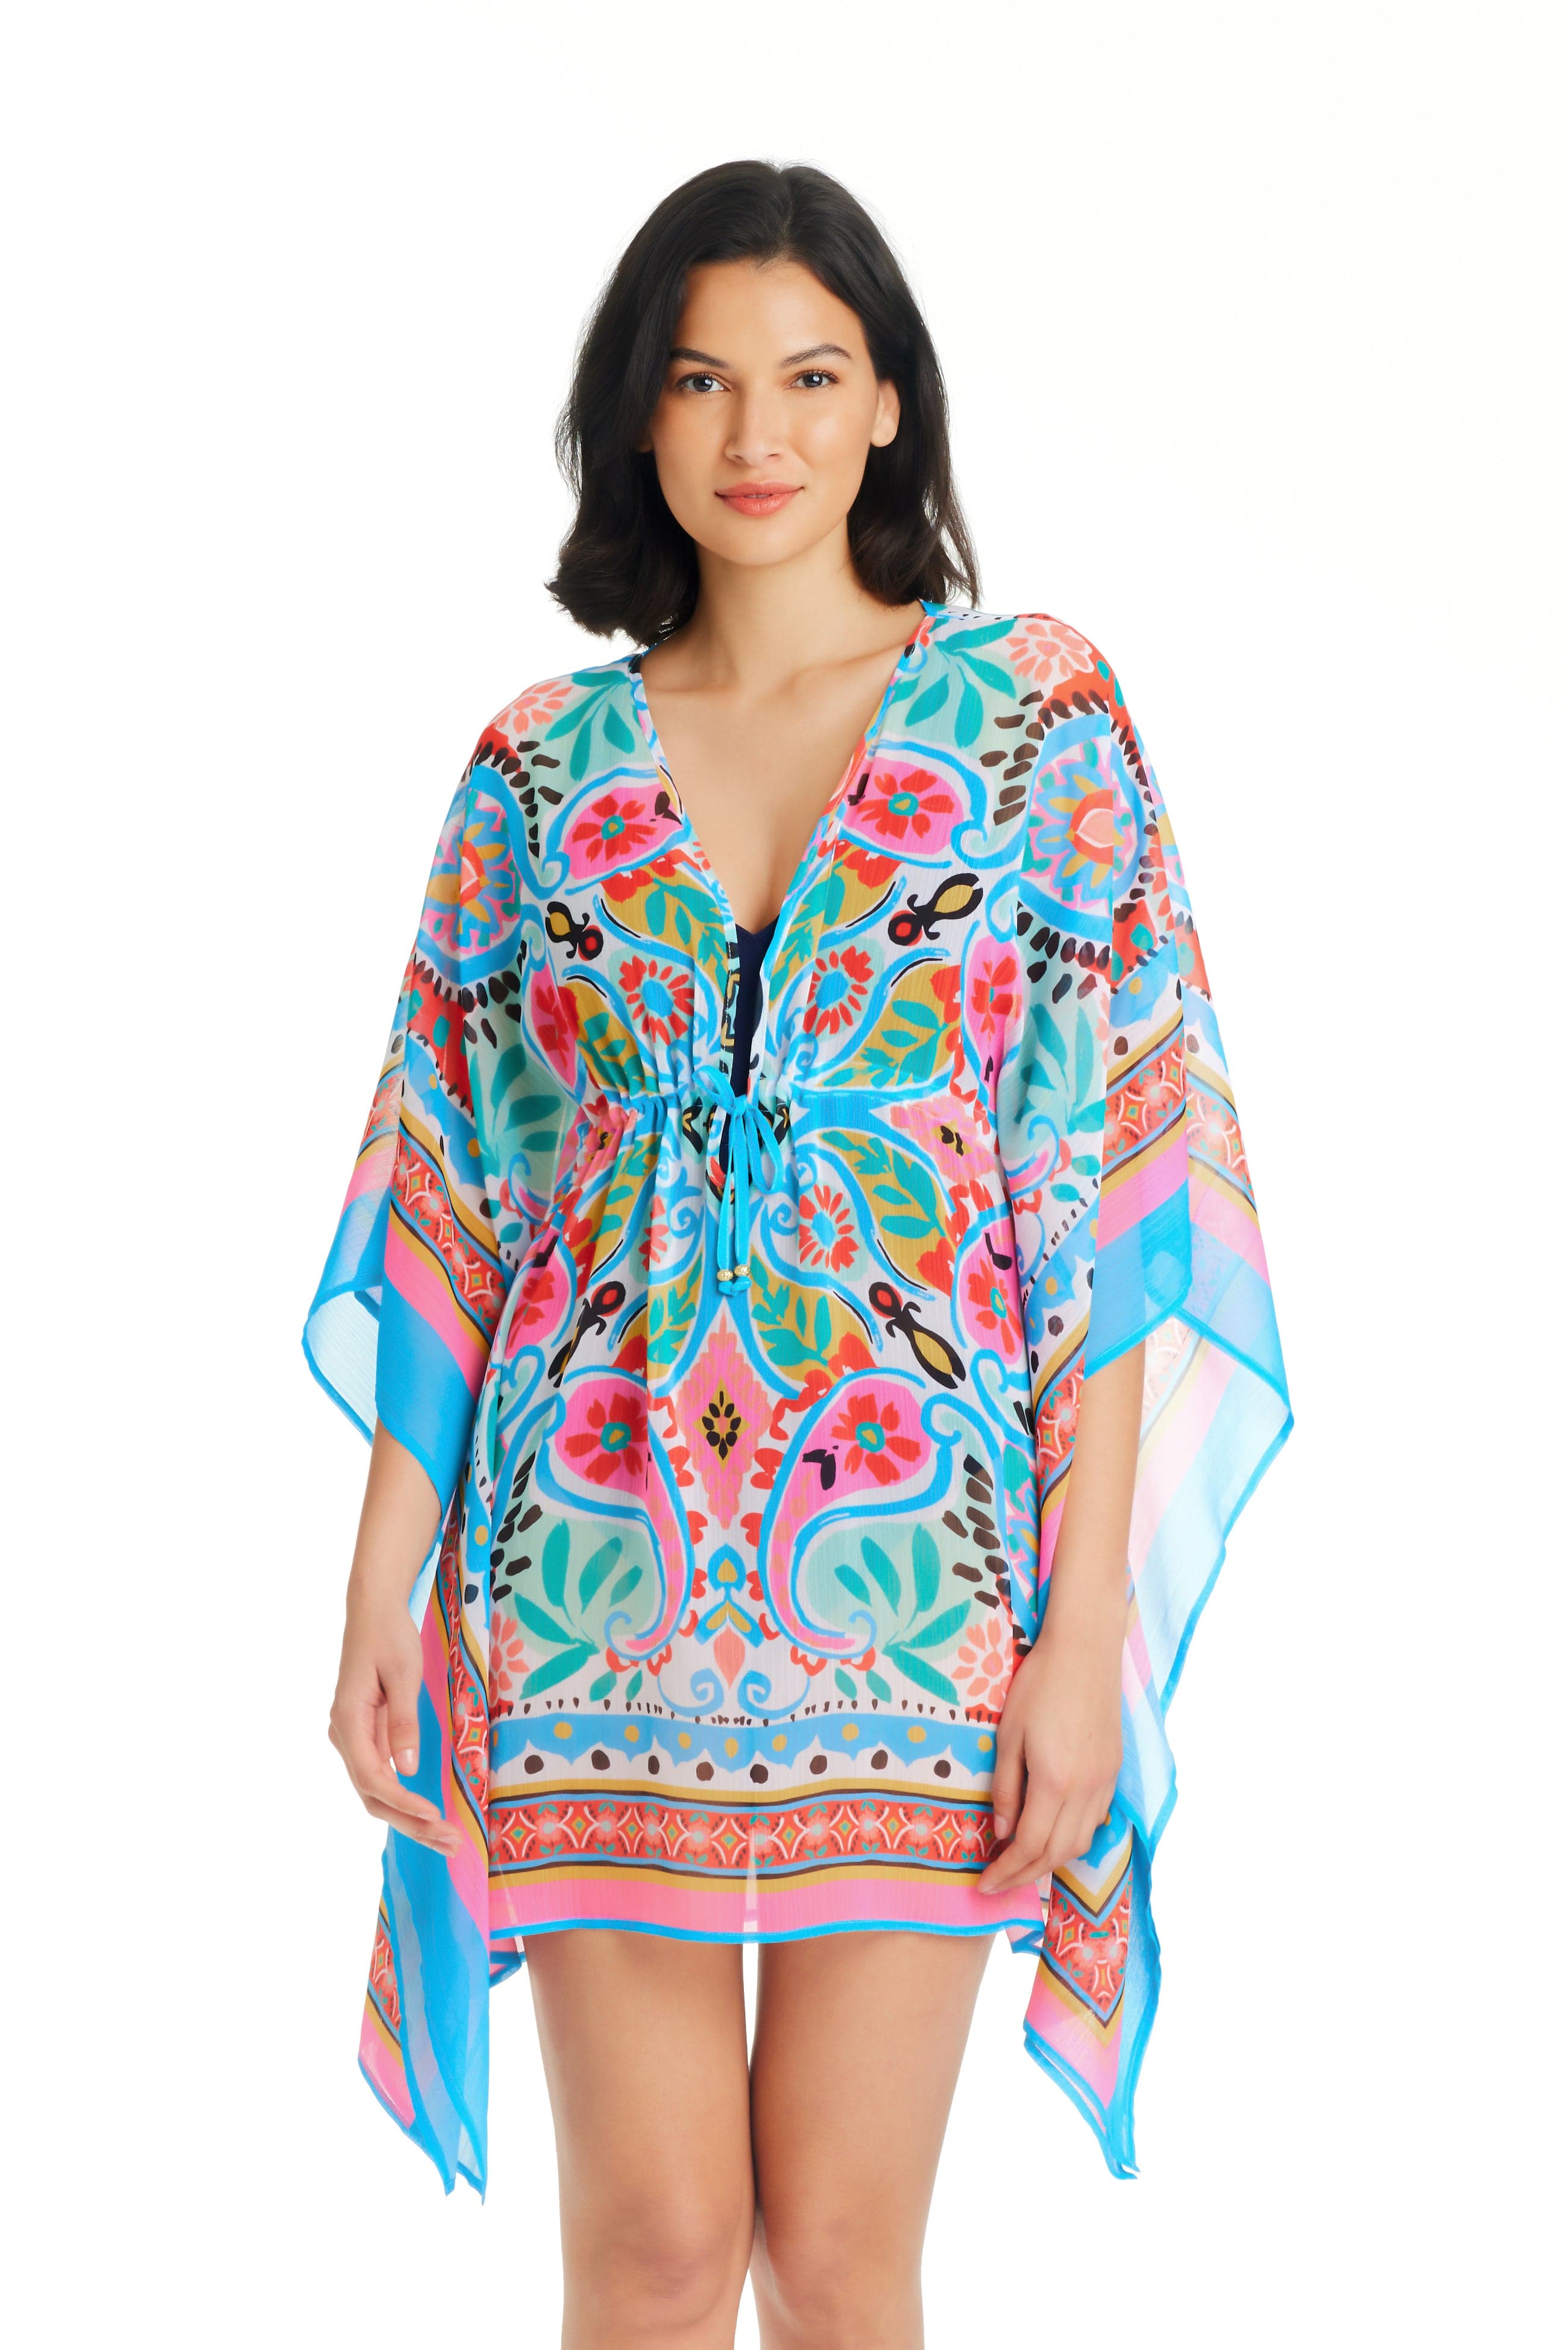 Get Happy Swimsuit Cover Up